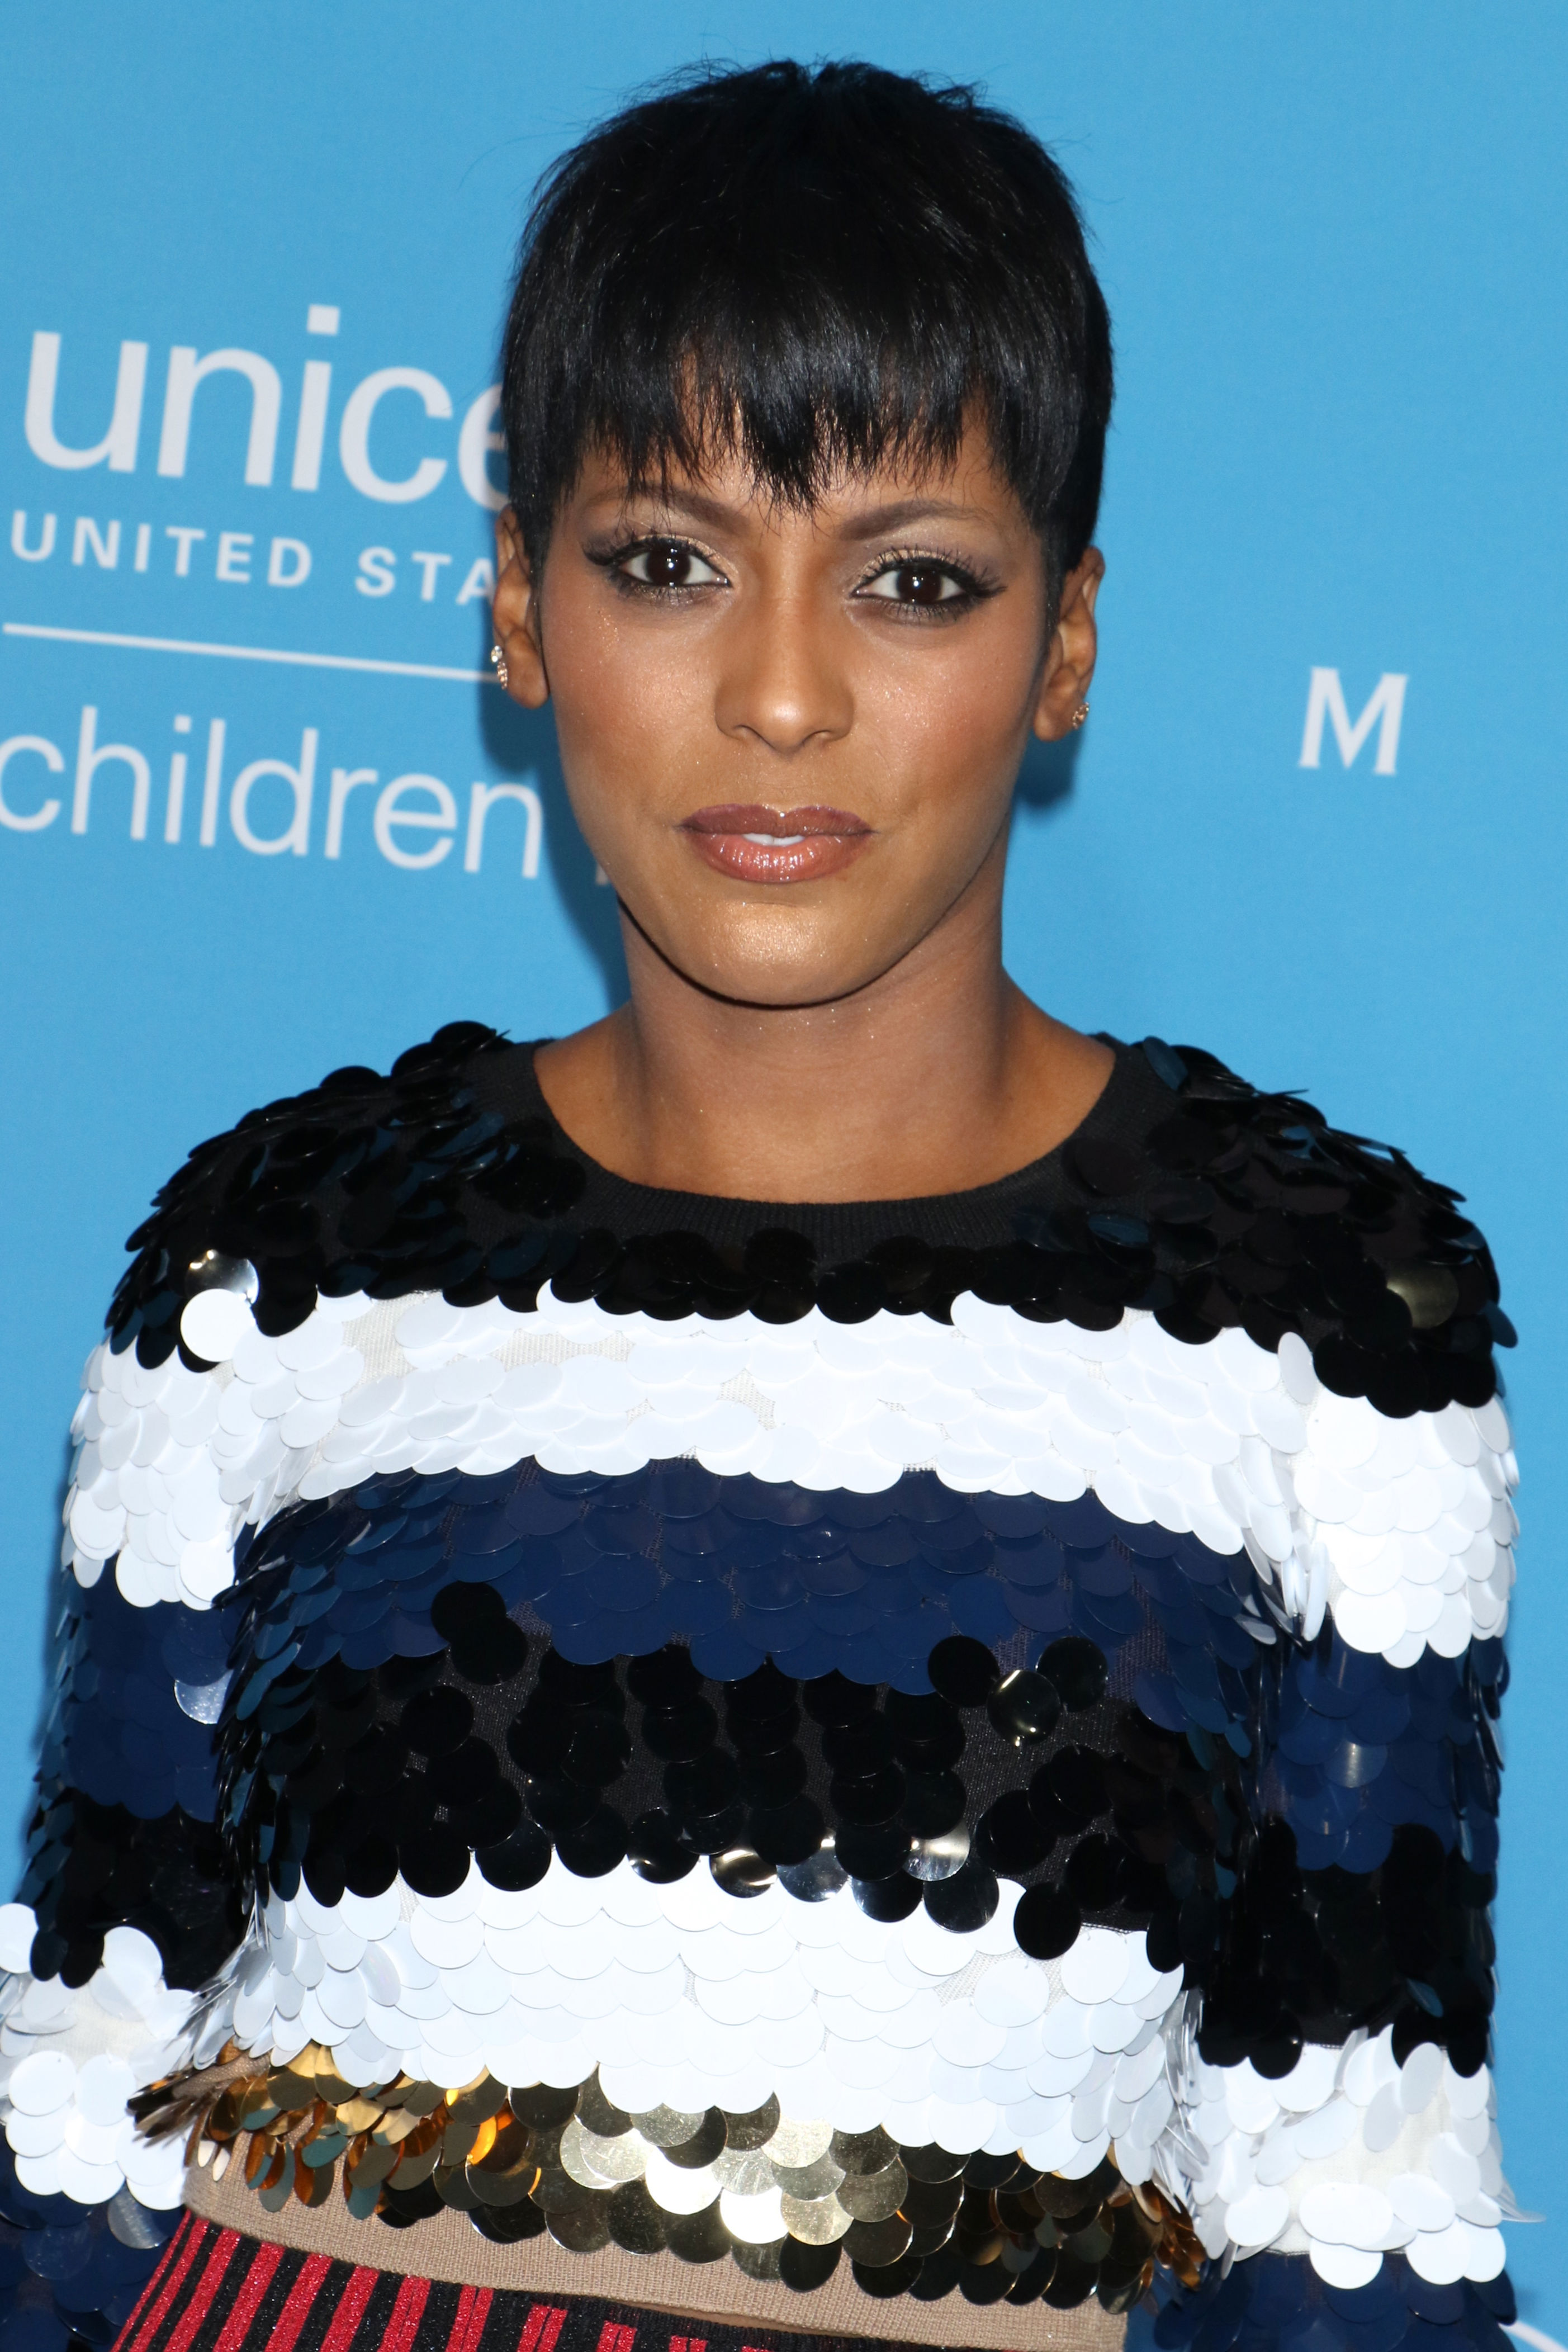 <p>Tamron Hall made history on the "Today" show when, in 2014, she became the first Black woman to serve as a co-anchor in the show's 65-year history. She's since left the network where she worked for a decade, declining to renew her contract in late January 2017 in the wake of the news that she and Al Roker would no longer be hosting the third hour of "Today" after former FOX News star Megyn Kelly (briefly) joined the network.</p>